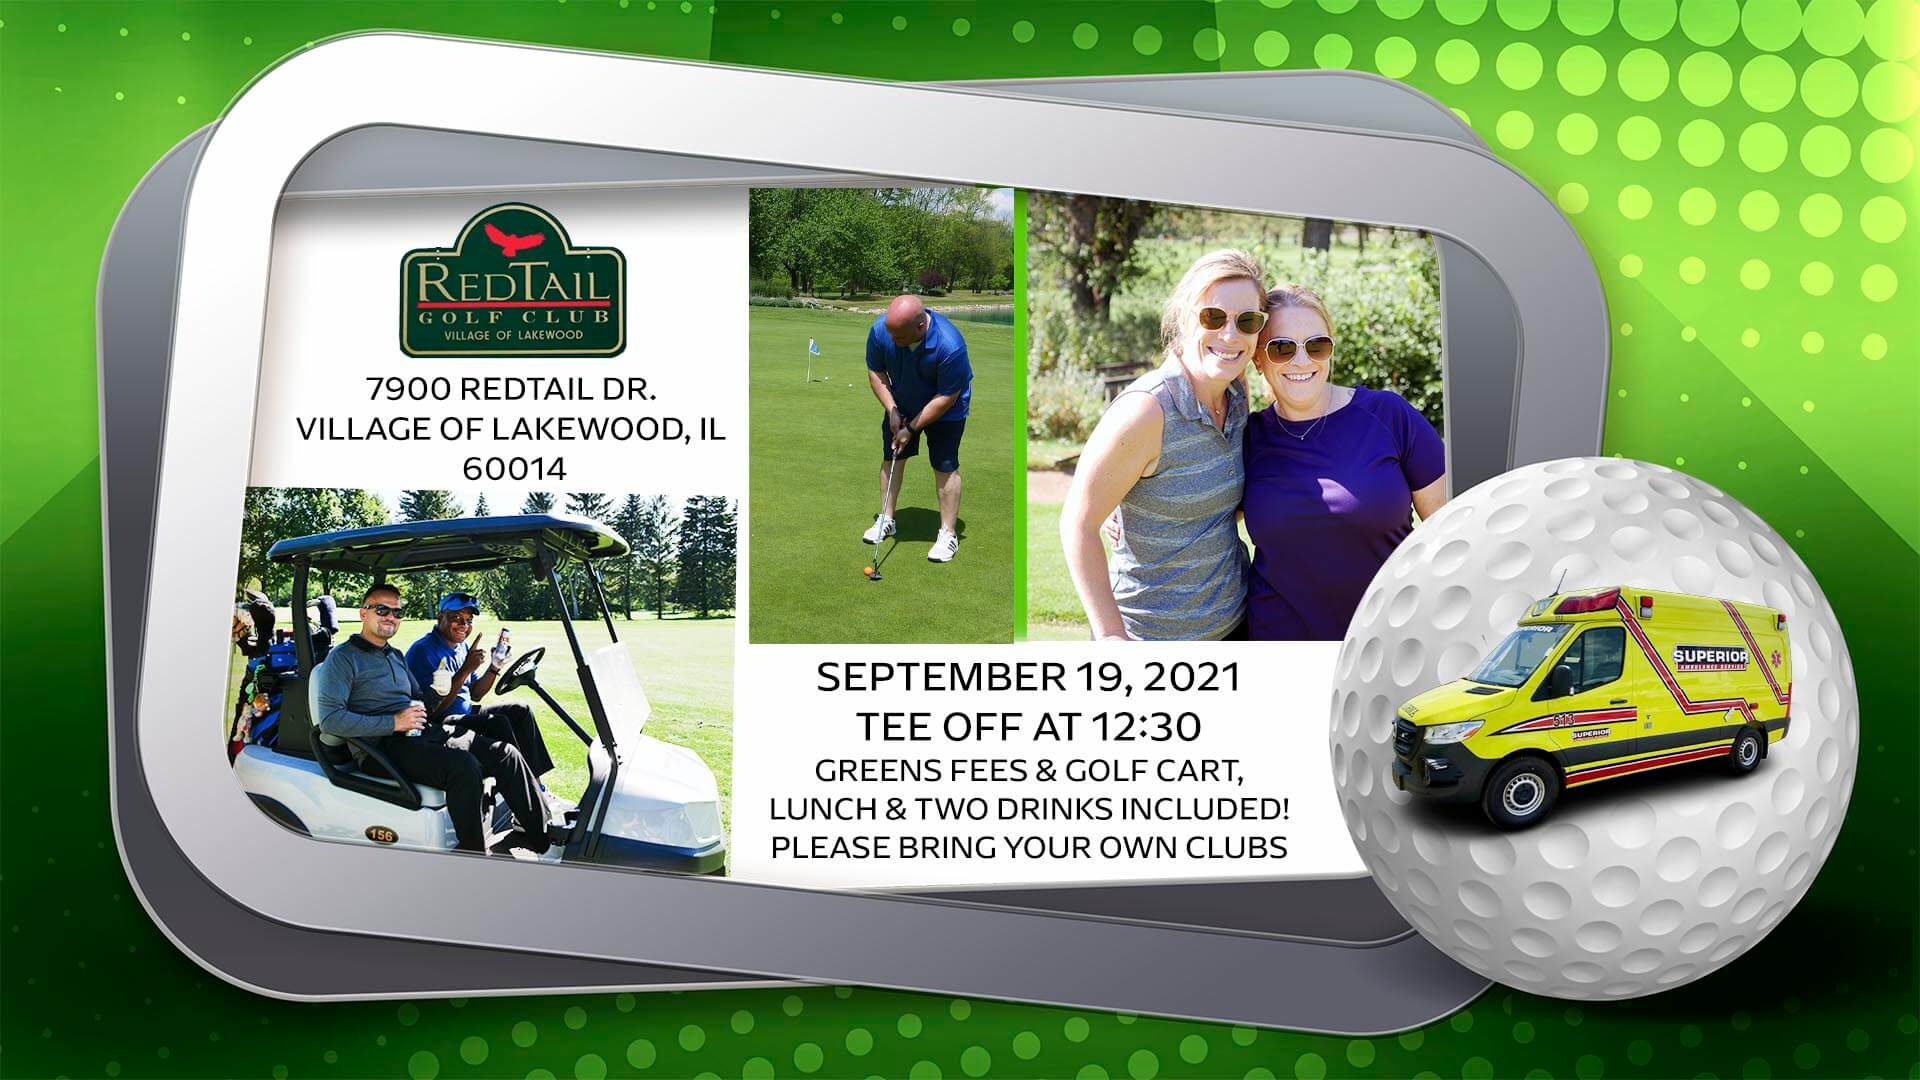 Superior Ambulance Red Tail Golf Outing